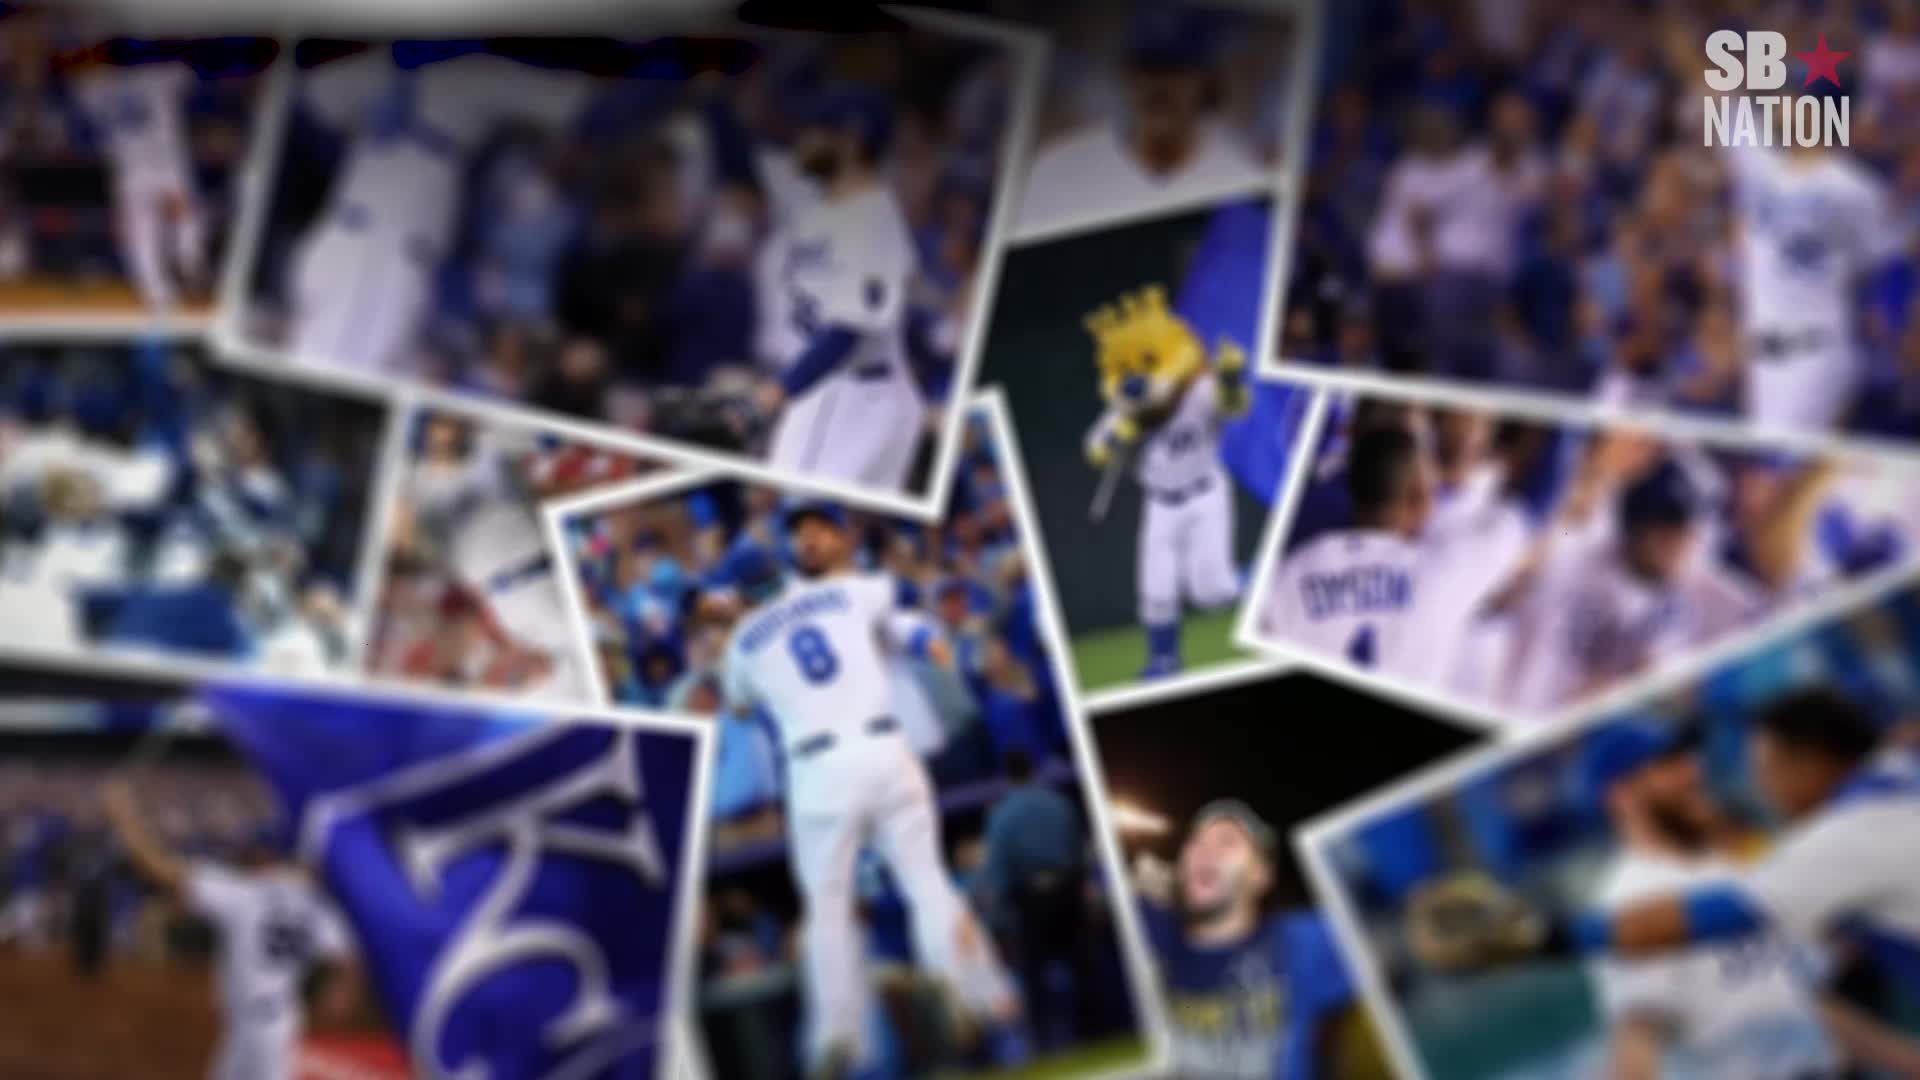 Royals parade 2015 schedule and route Kansas City celebrates World Series win on Tuesday – SBNation.com